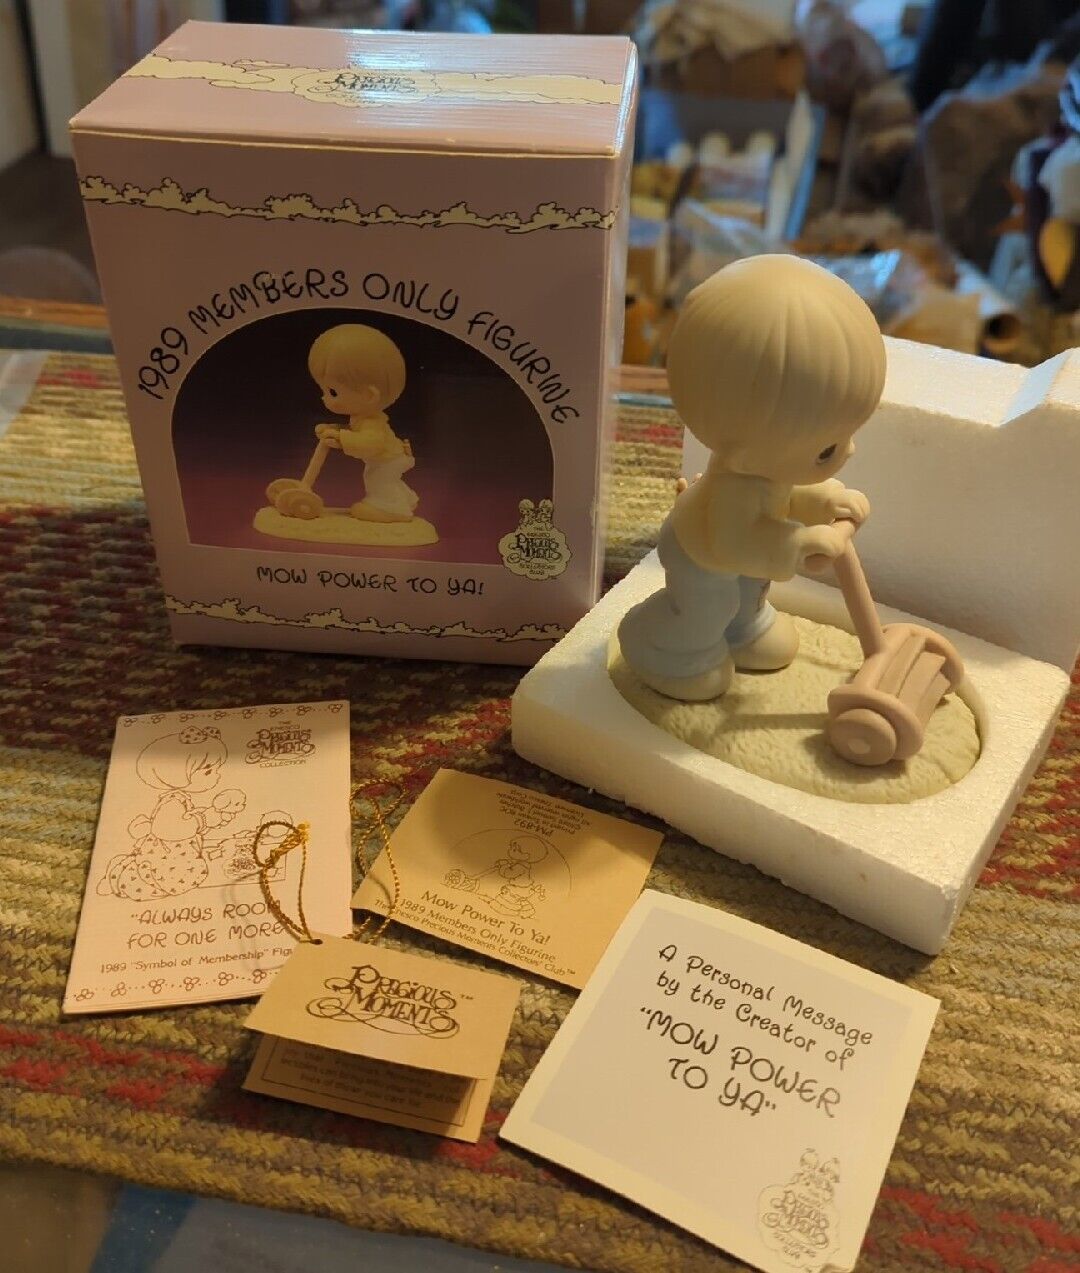 PRECIOUS MOMENTS Figurine “Mow Power To You” 1989 Members Only W/Box #PM-892